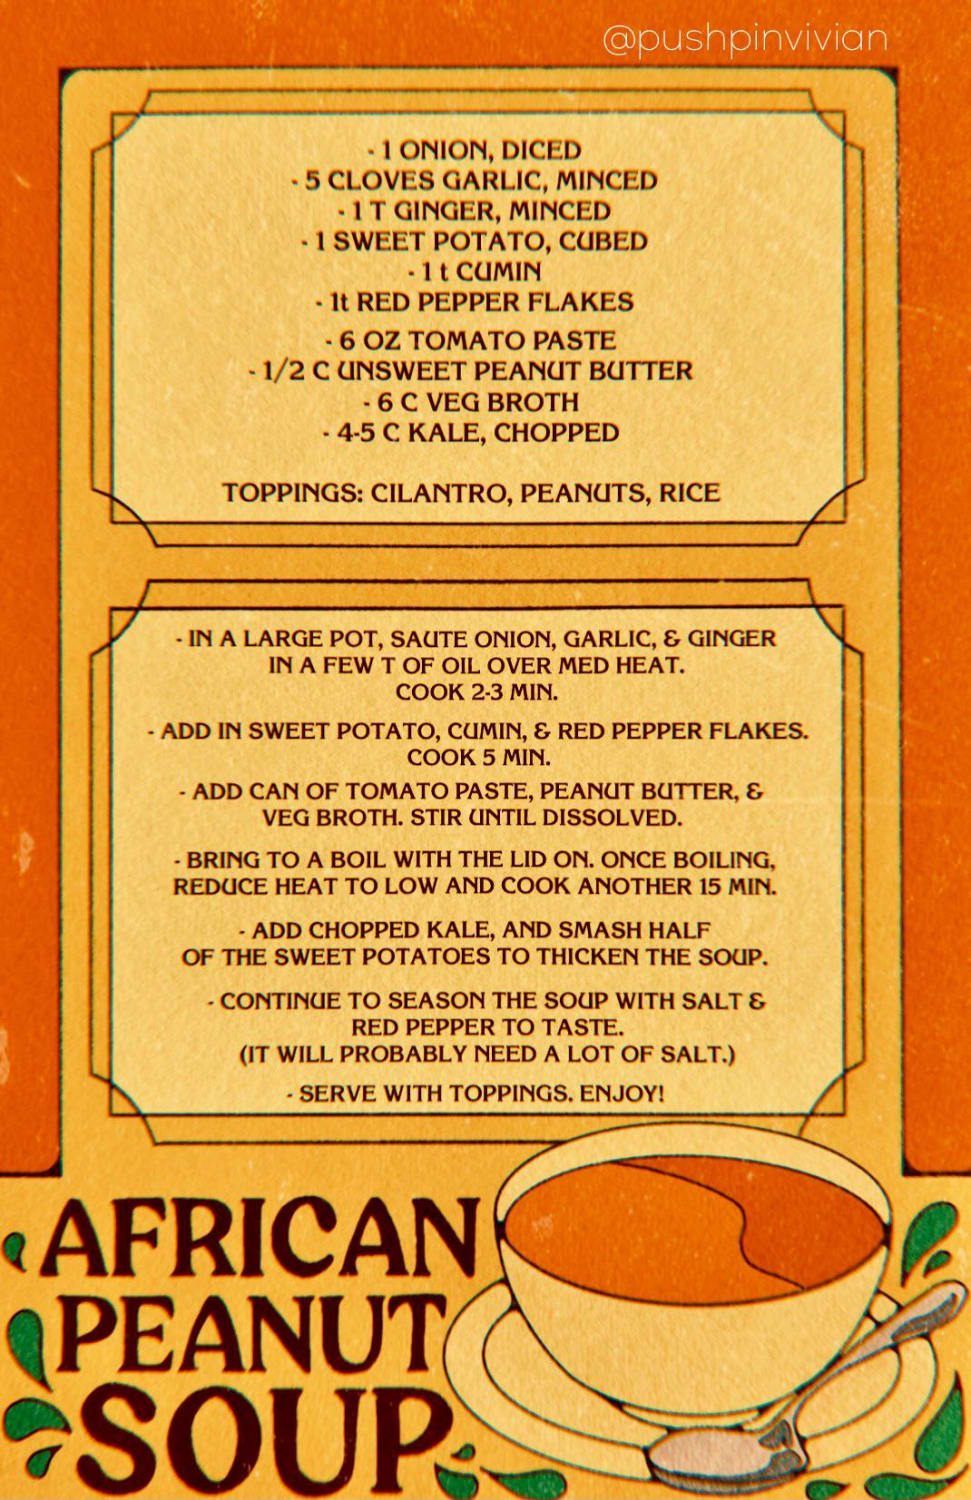 Easy African Peanut Soup Recipe, Illustrated By Me!